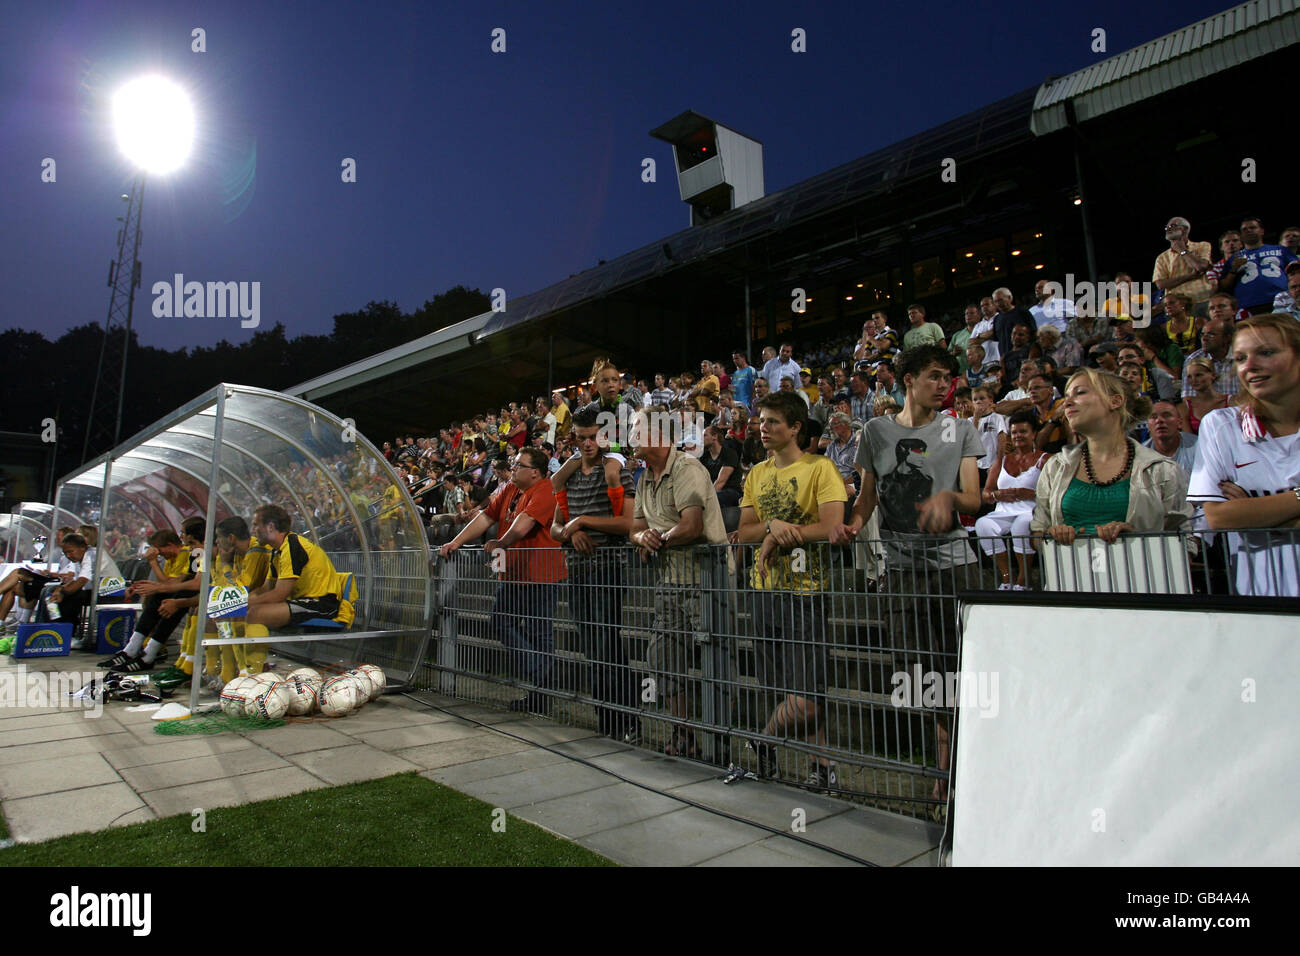 Soccer - Friendly - VVV Venlo v PSV Eindhoven - Seacon Stadium. The crowd watch the action from the stands Stock Photo